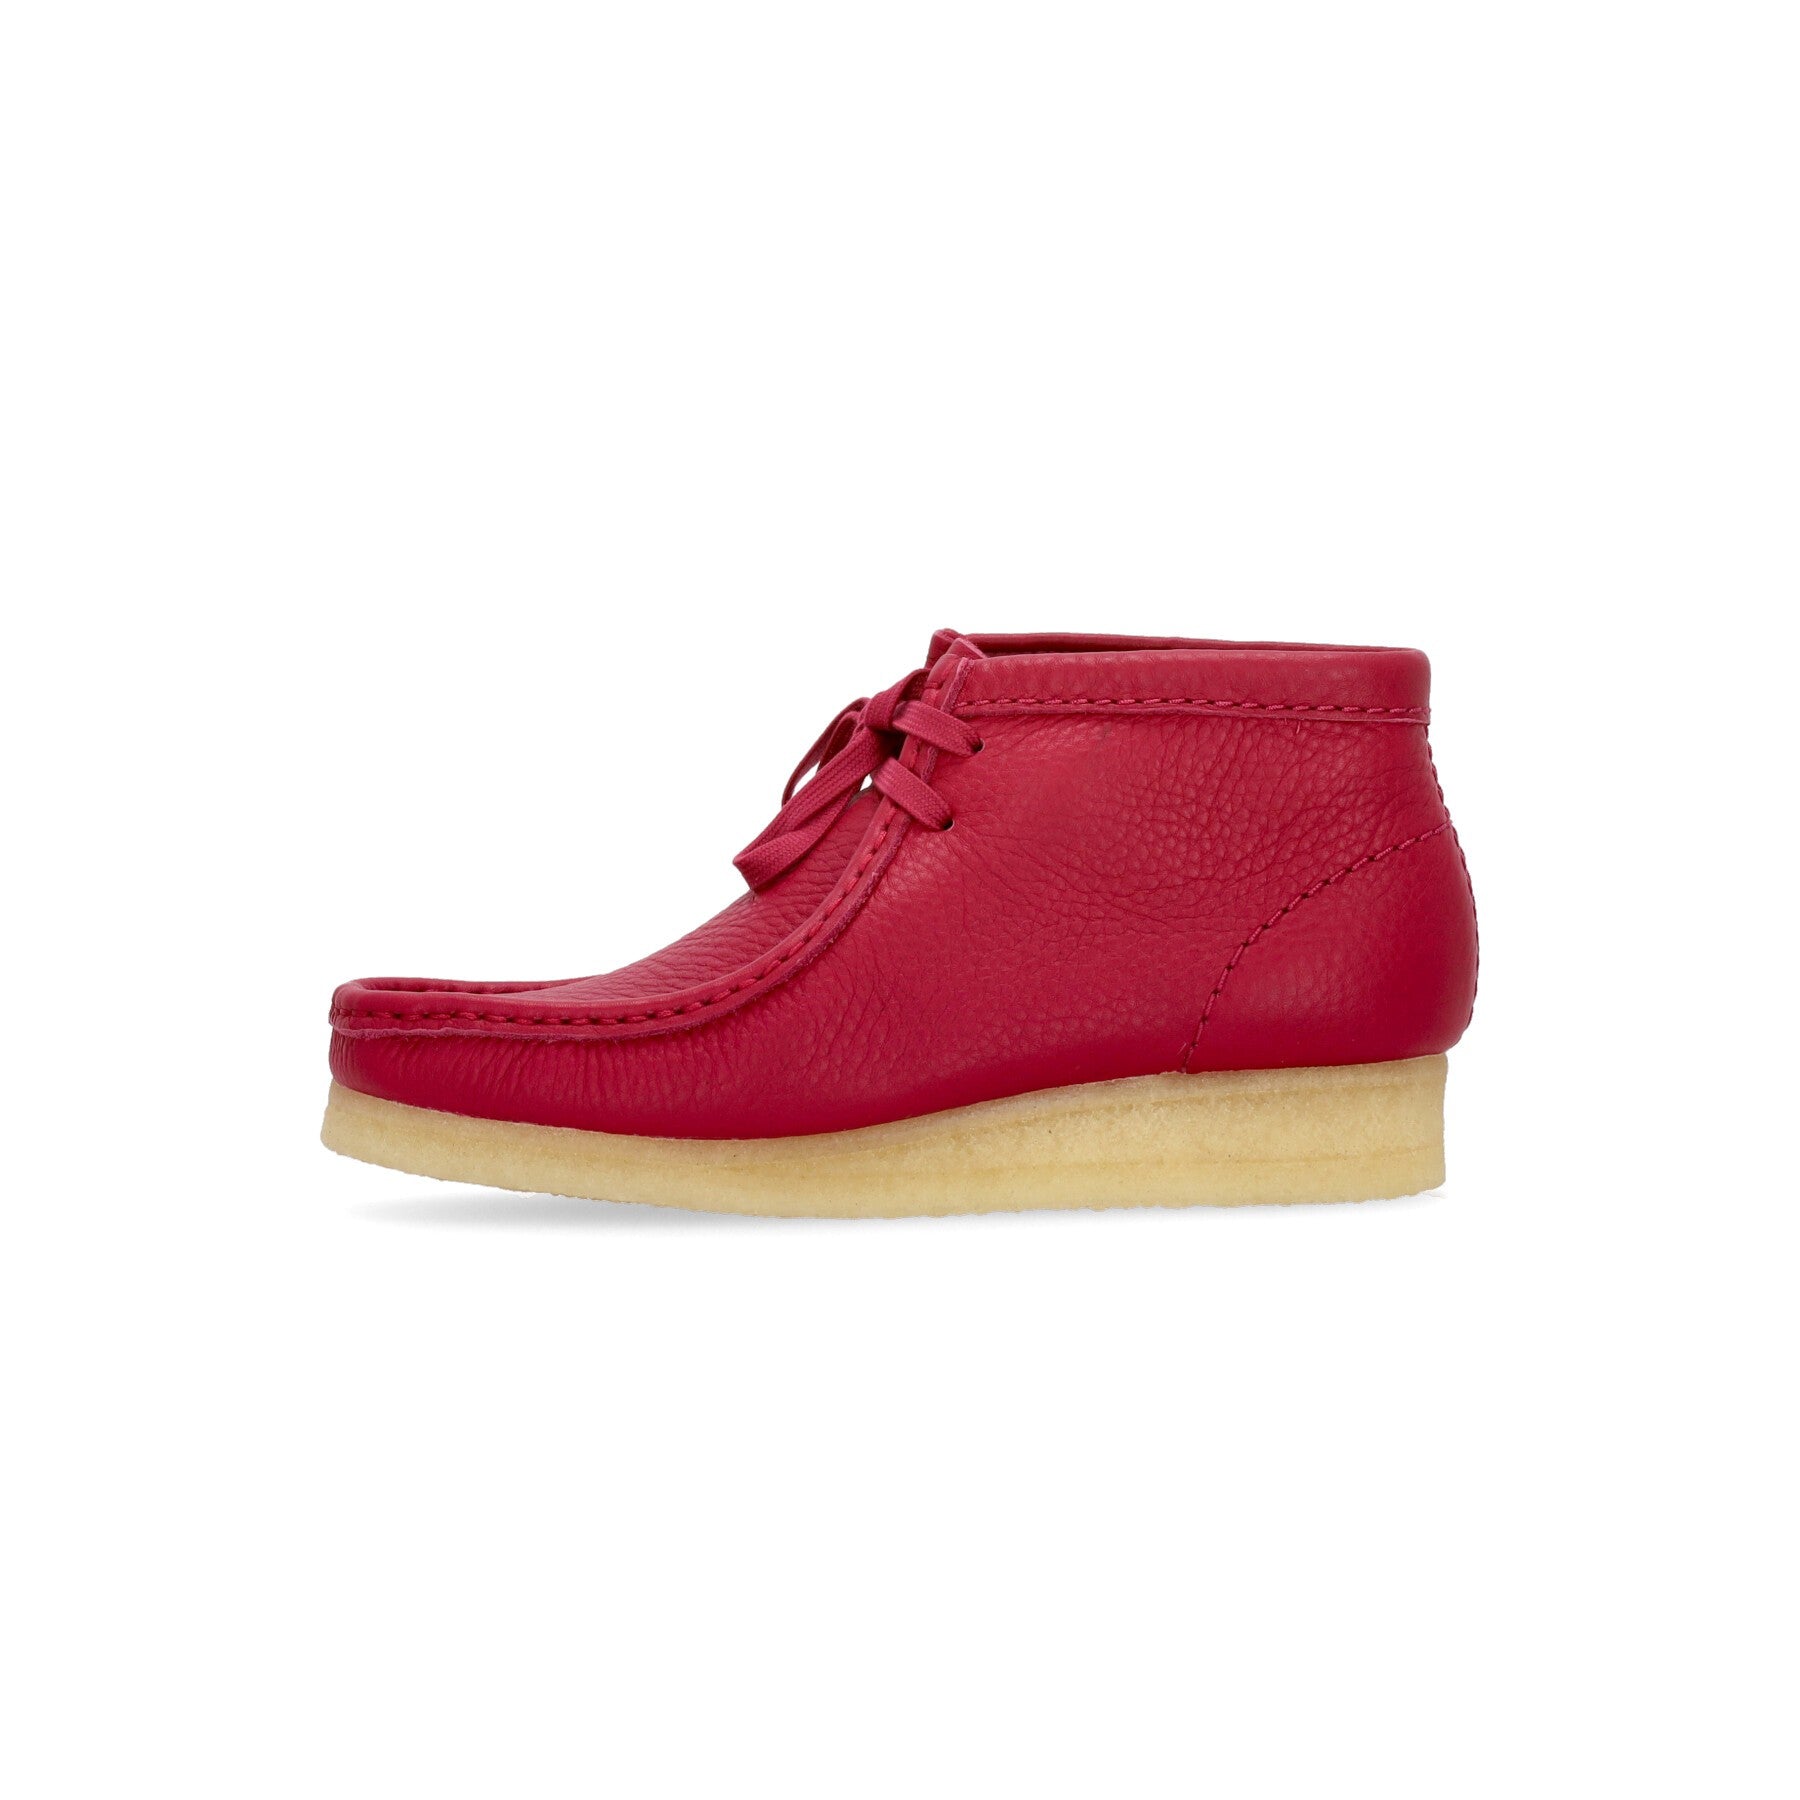 Clarks, Scarpa Lifestyle Donna W Wallabee Boot, Berry Leather